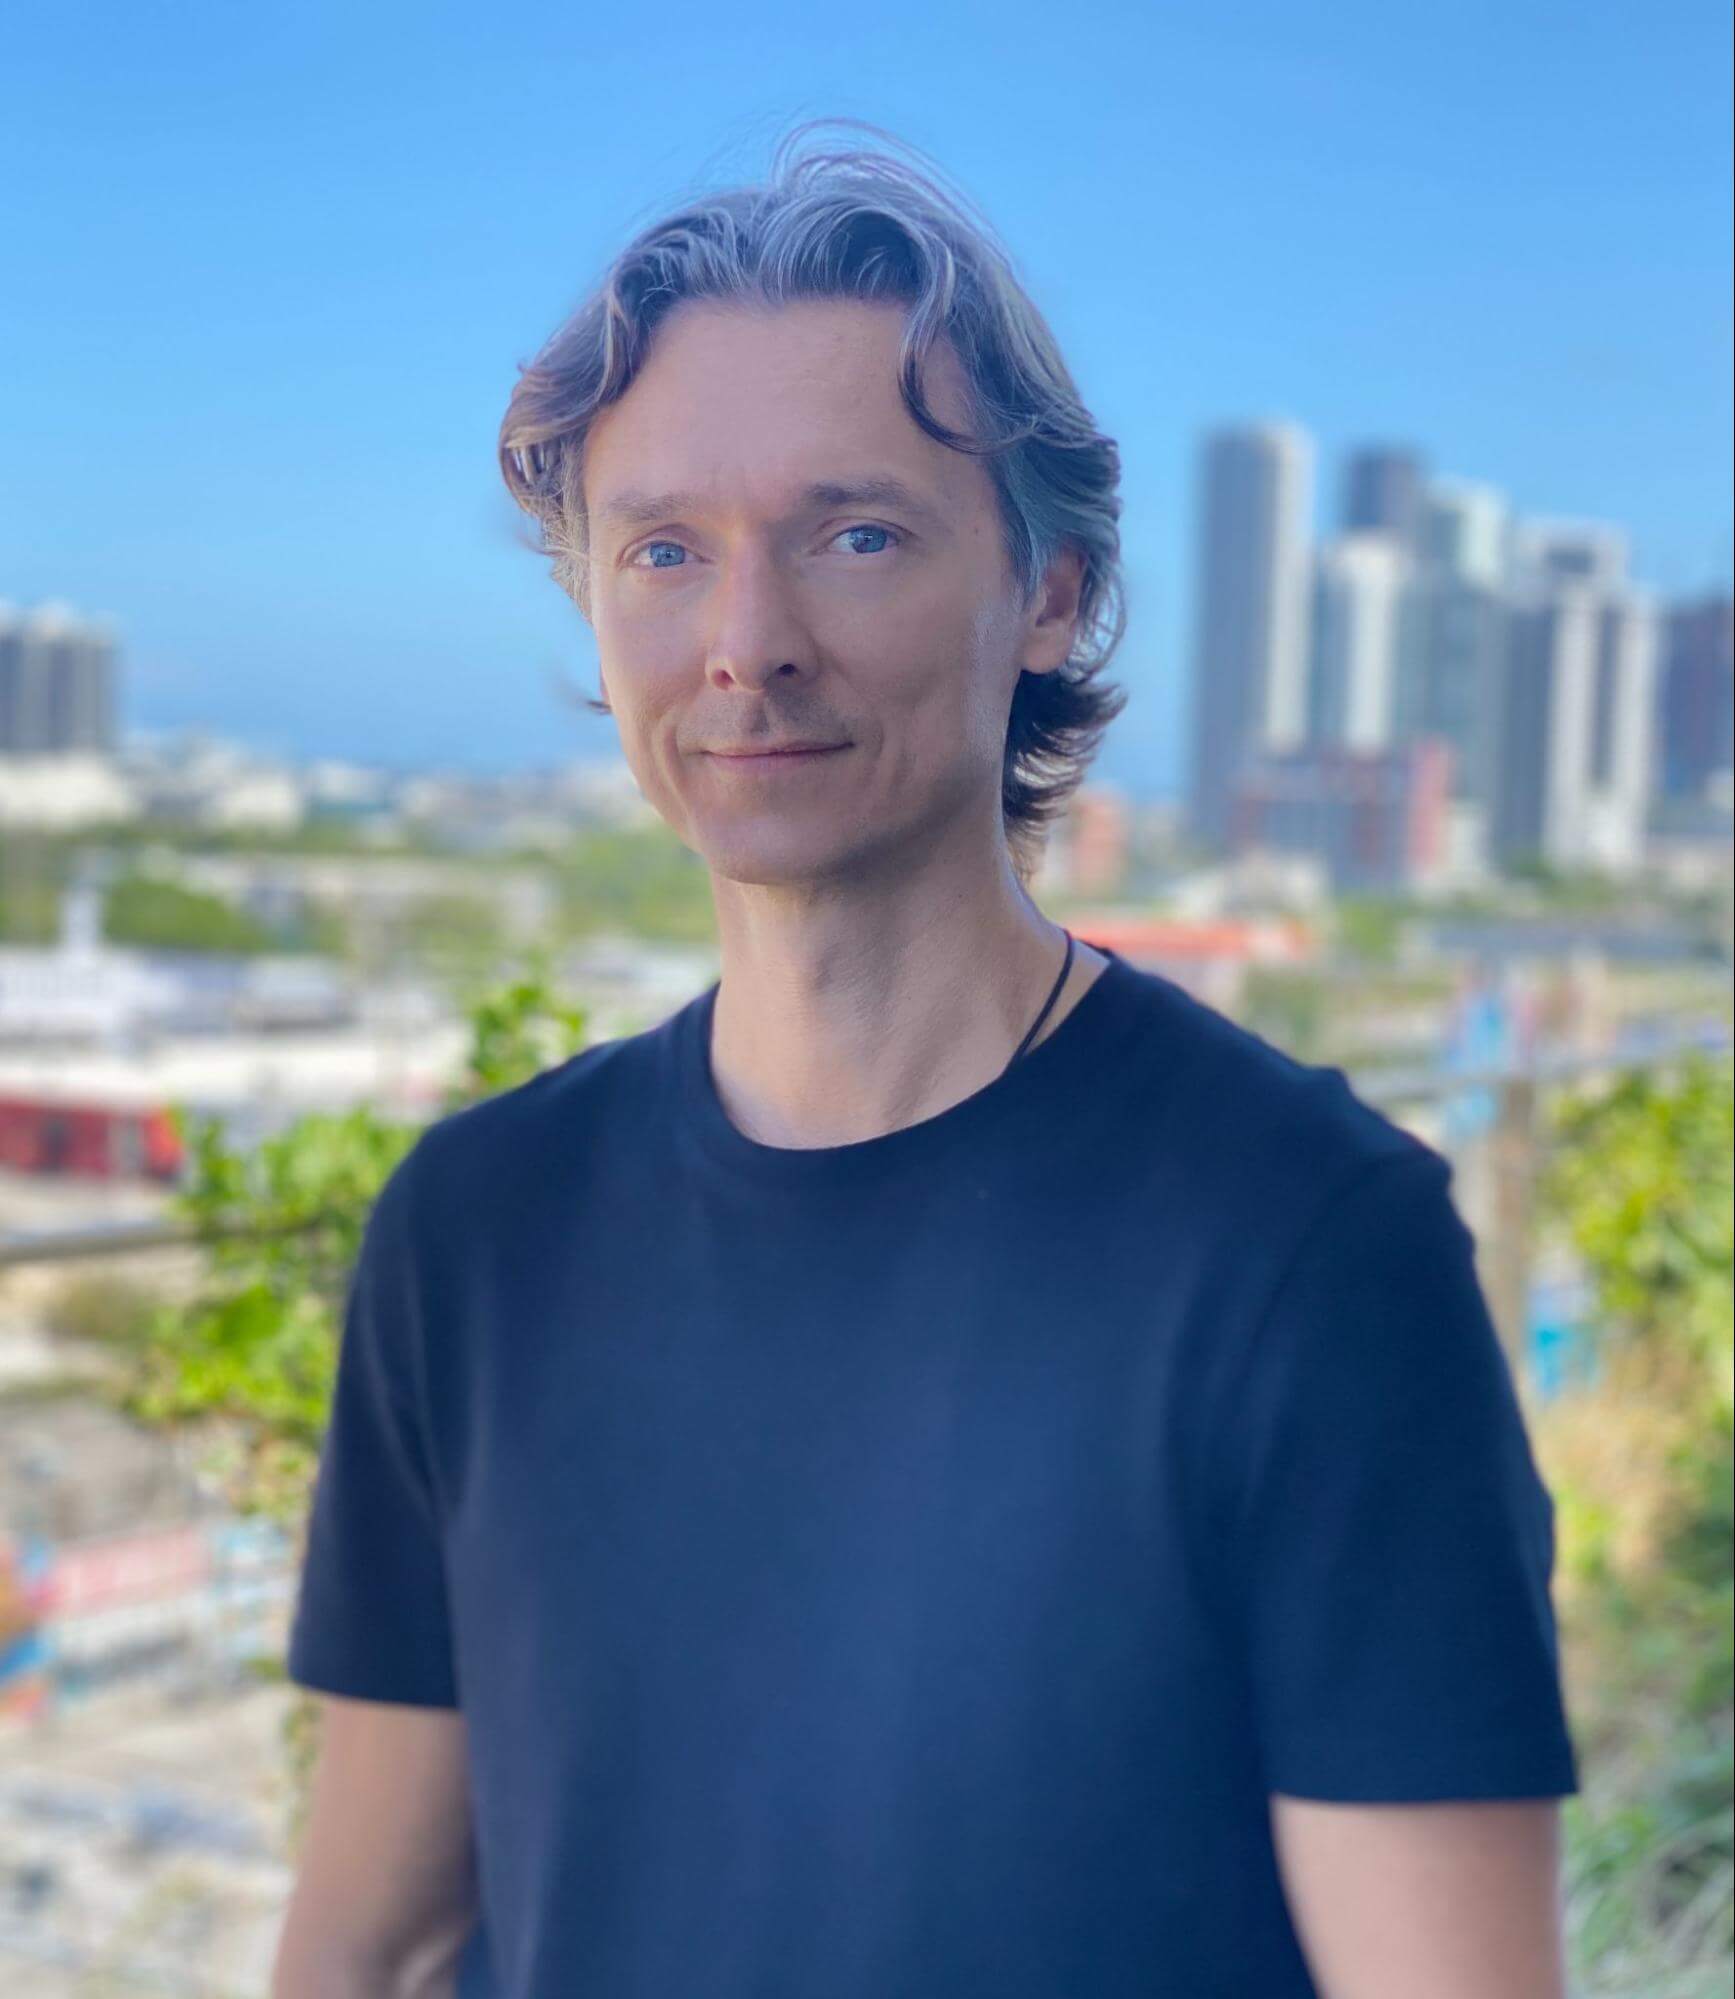 Gemini team co-founder and CEO Andrei Barysevich